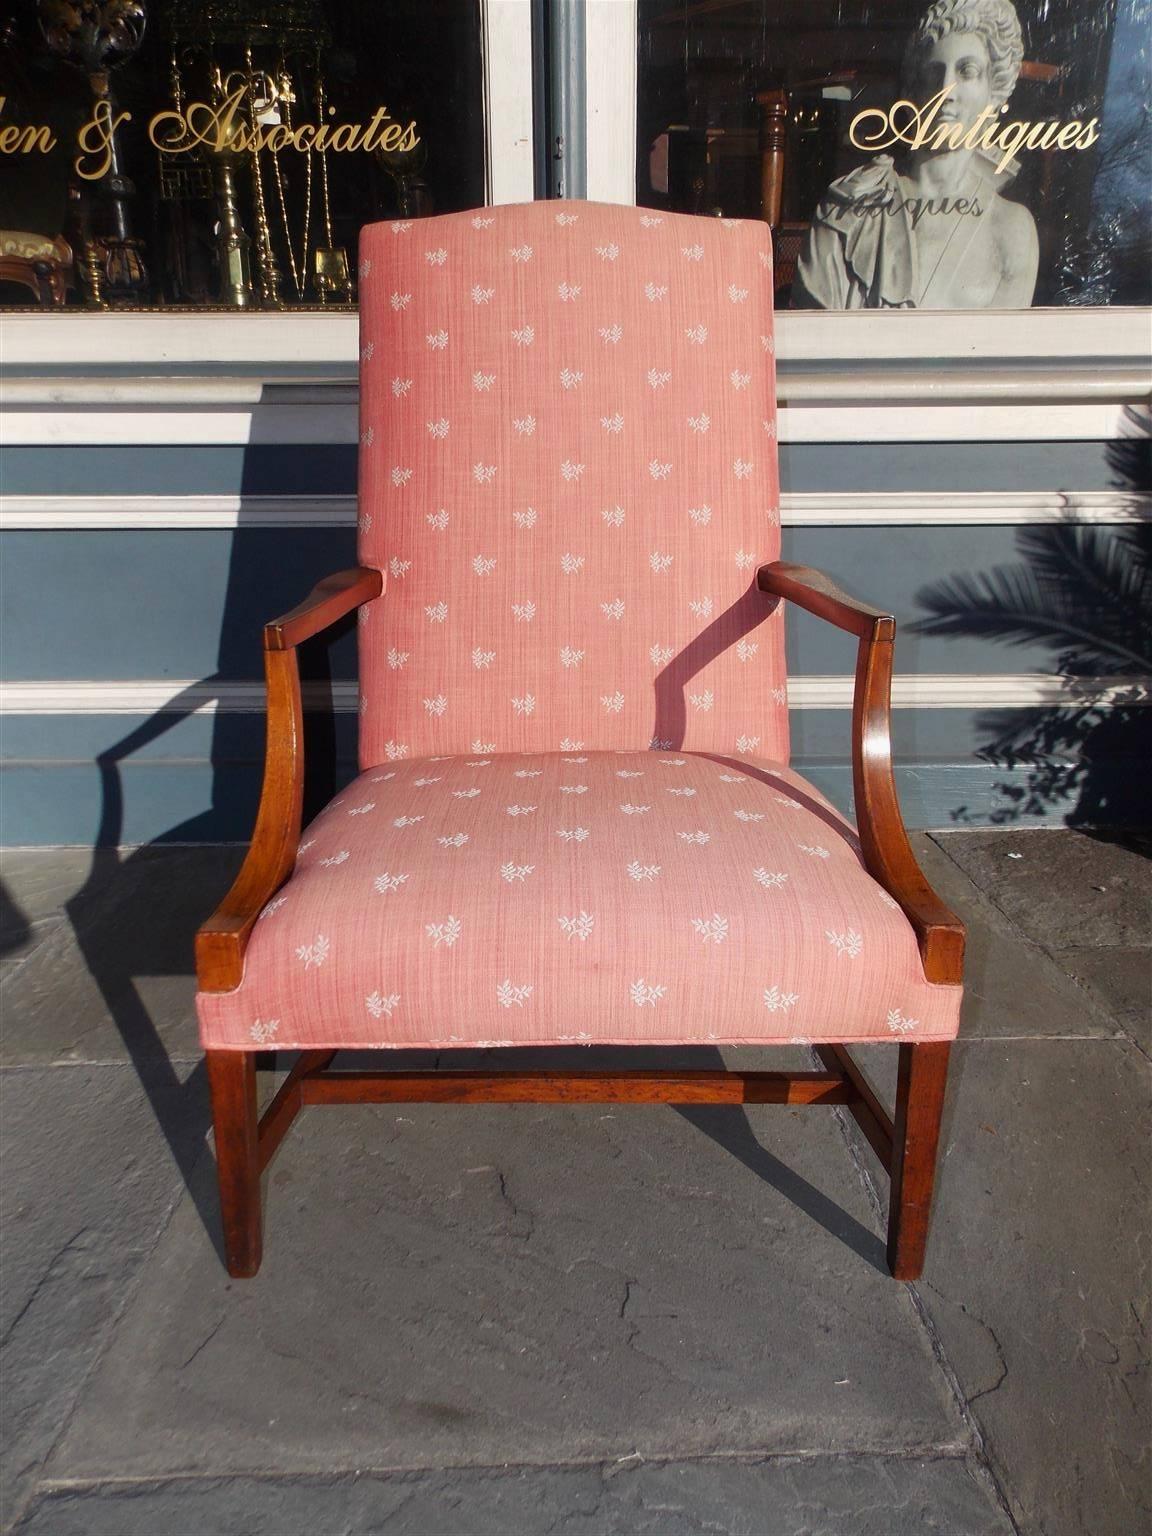 American Hepplewhite mahogany Martha Washington arm chair with a camel back, satinwood inlaid scrolled arms, floral upholstery, and terminating on tapered squared legs with the original connecting stretchers, Late 18th century.